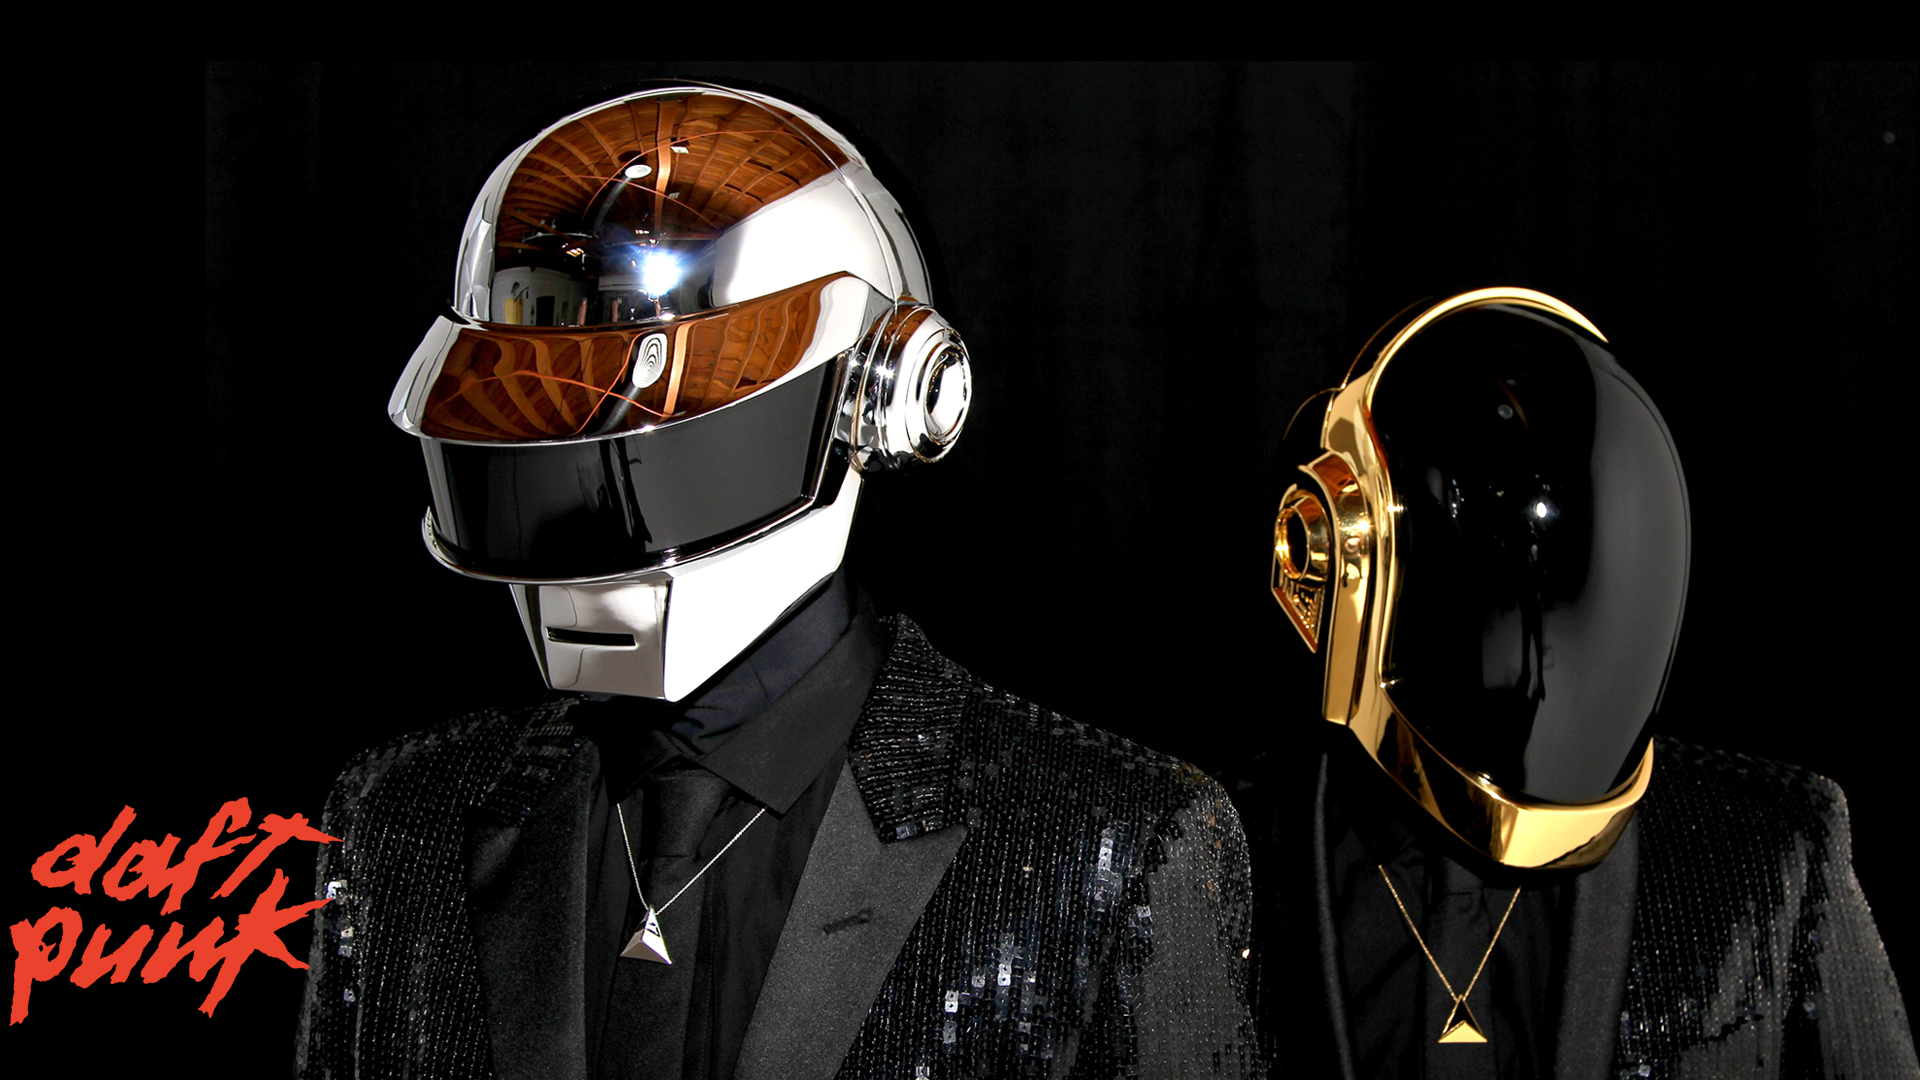 Quotes From Daft Punk - HD Wallpaper 